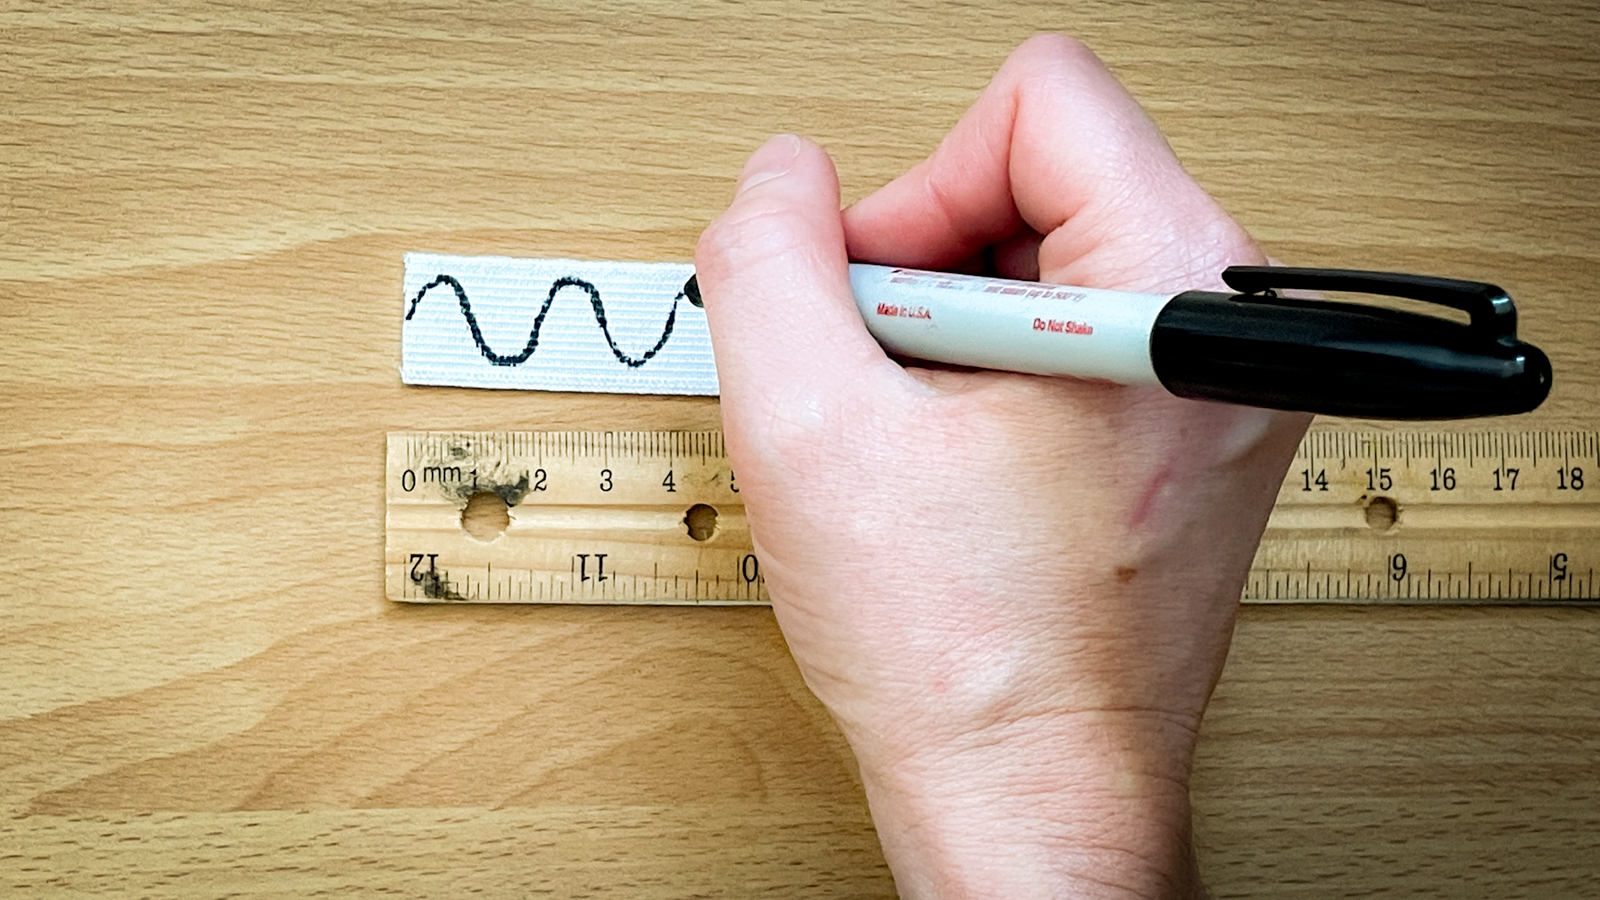 A person draws a wavy line connecting the dots drawn on a piece of elastic.